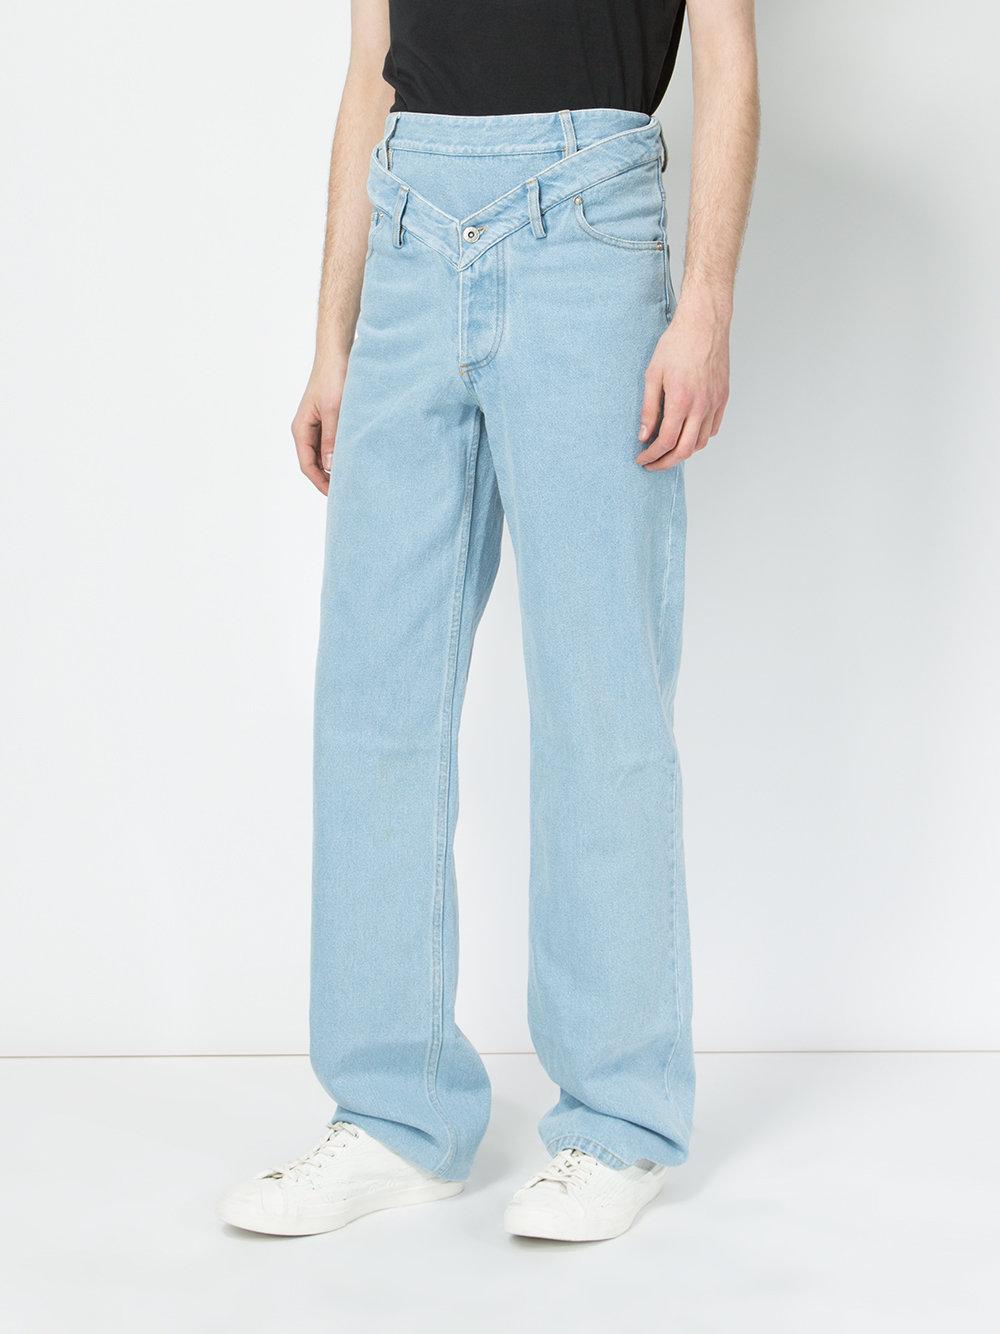 Y. Project Double-waistband Loose-fit Jeans in Blue for Men - Lyst